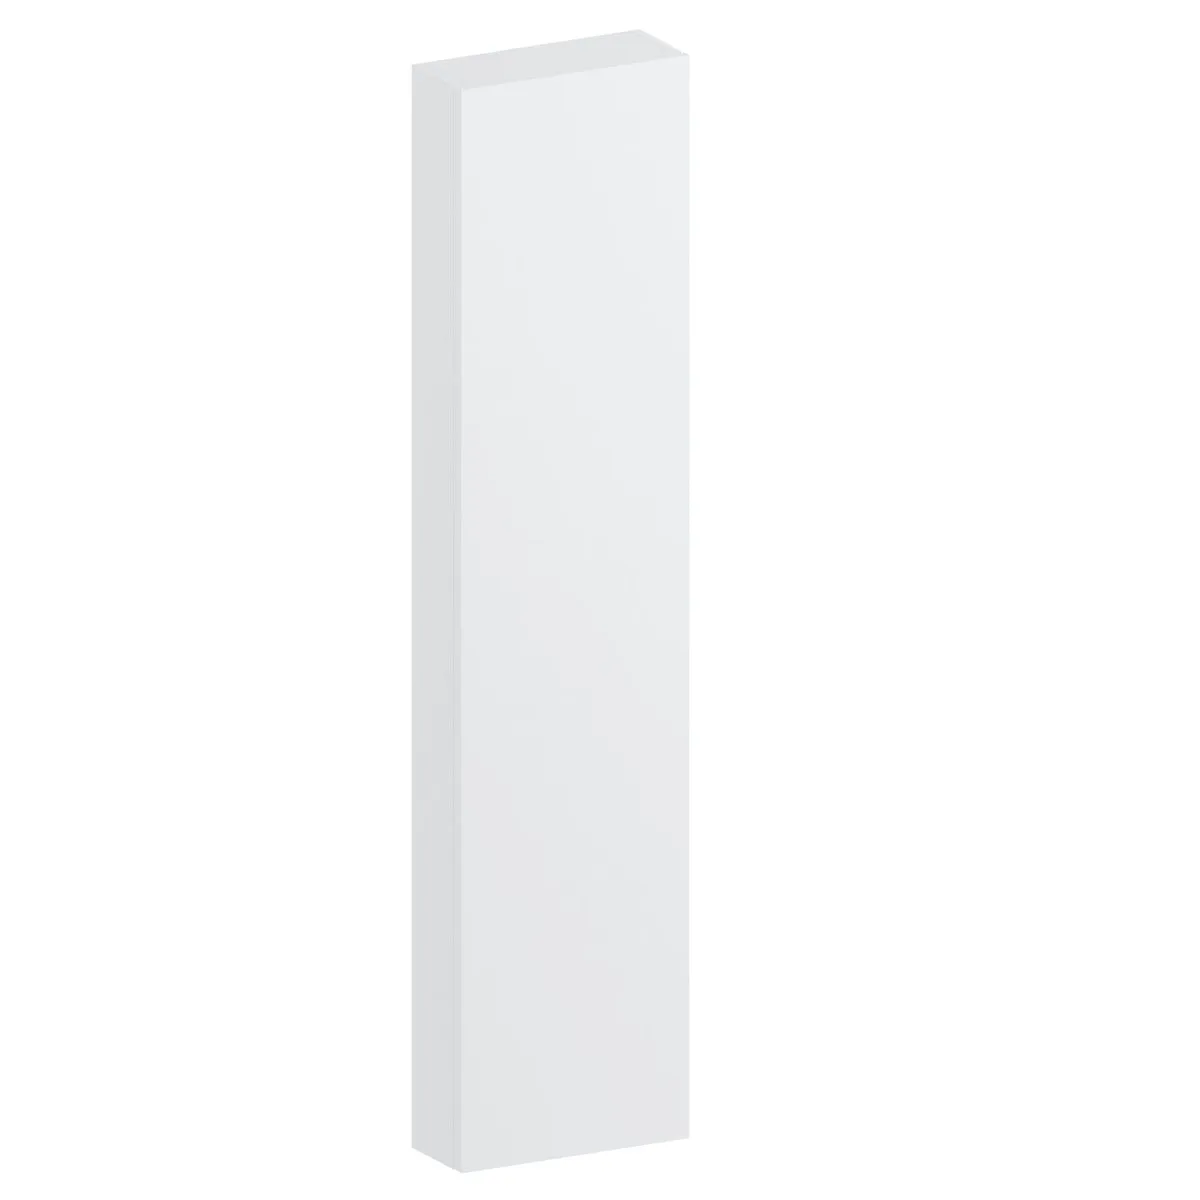 Accents Slimline white wall hung cabinet 1250 x 300mm